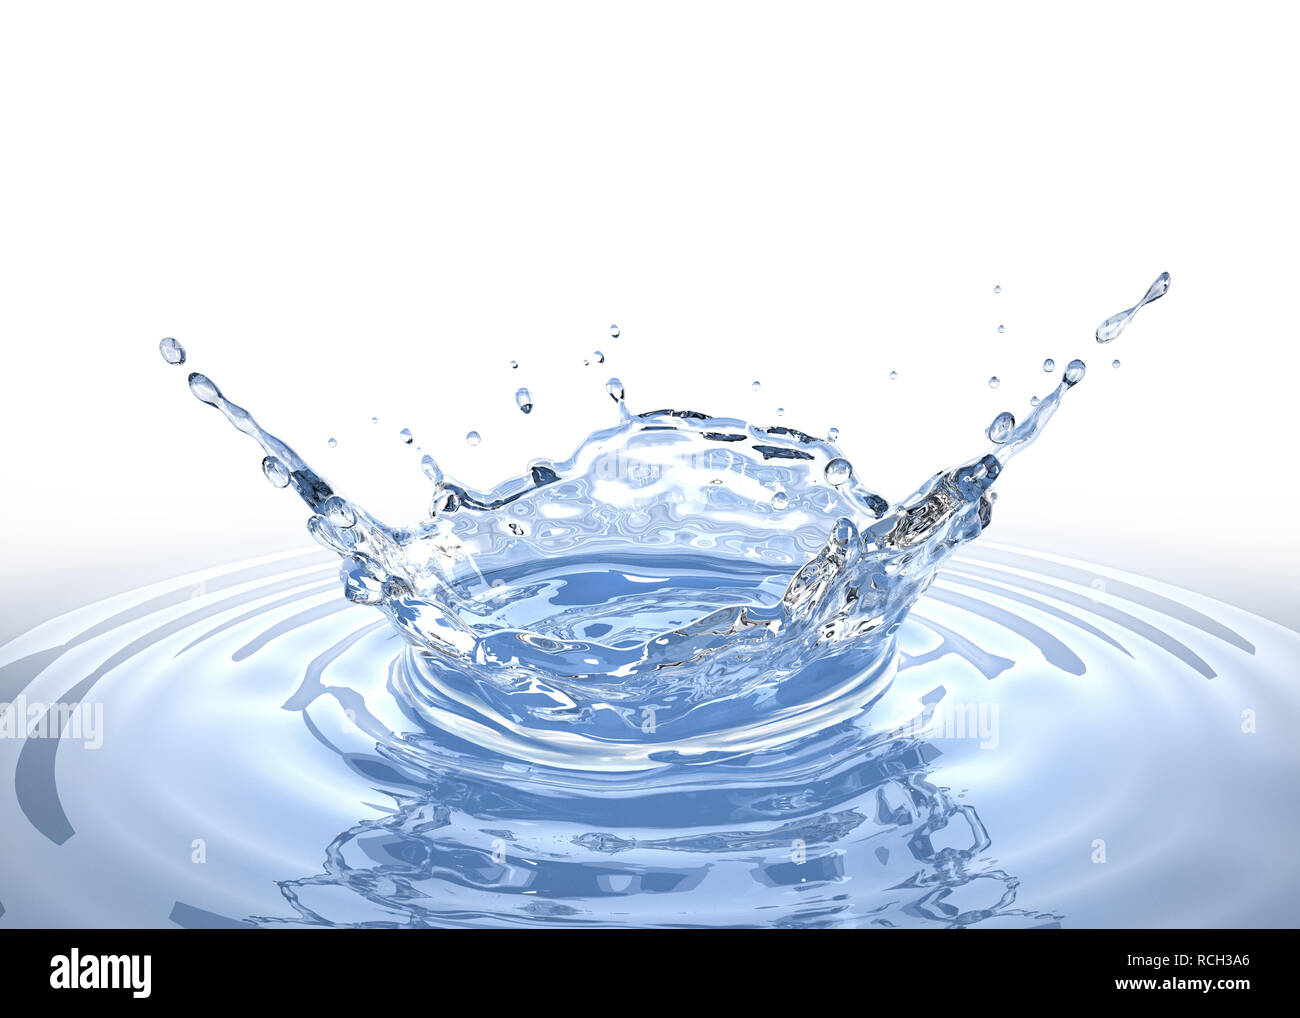 Water crown splash in a water pool, with circular ripples around. Bird eye view Isolated on white background. Clipping path included. Stock Photo